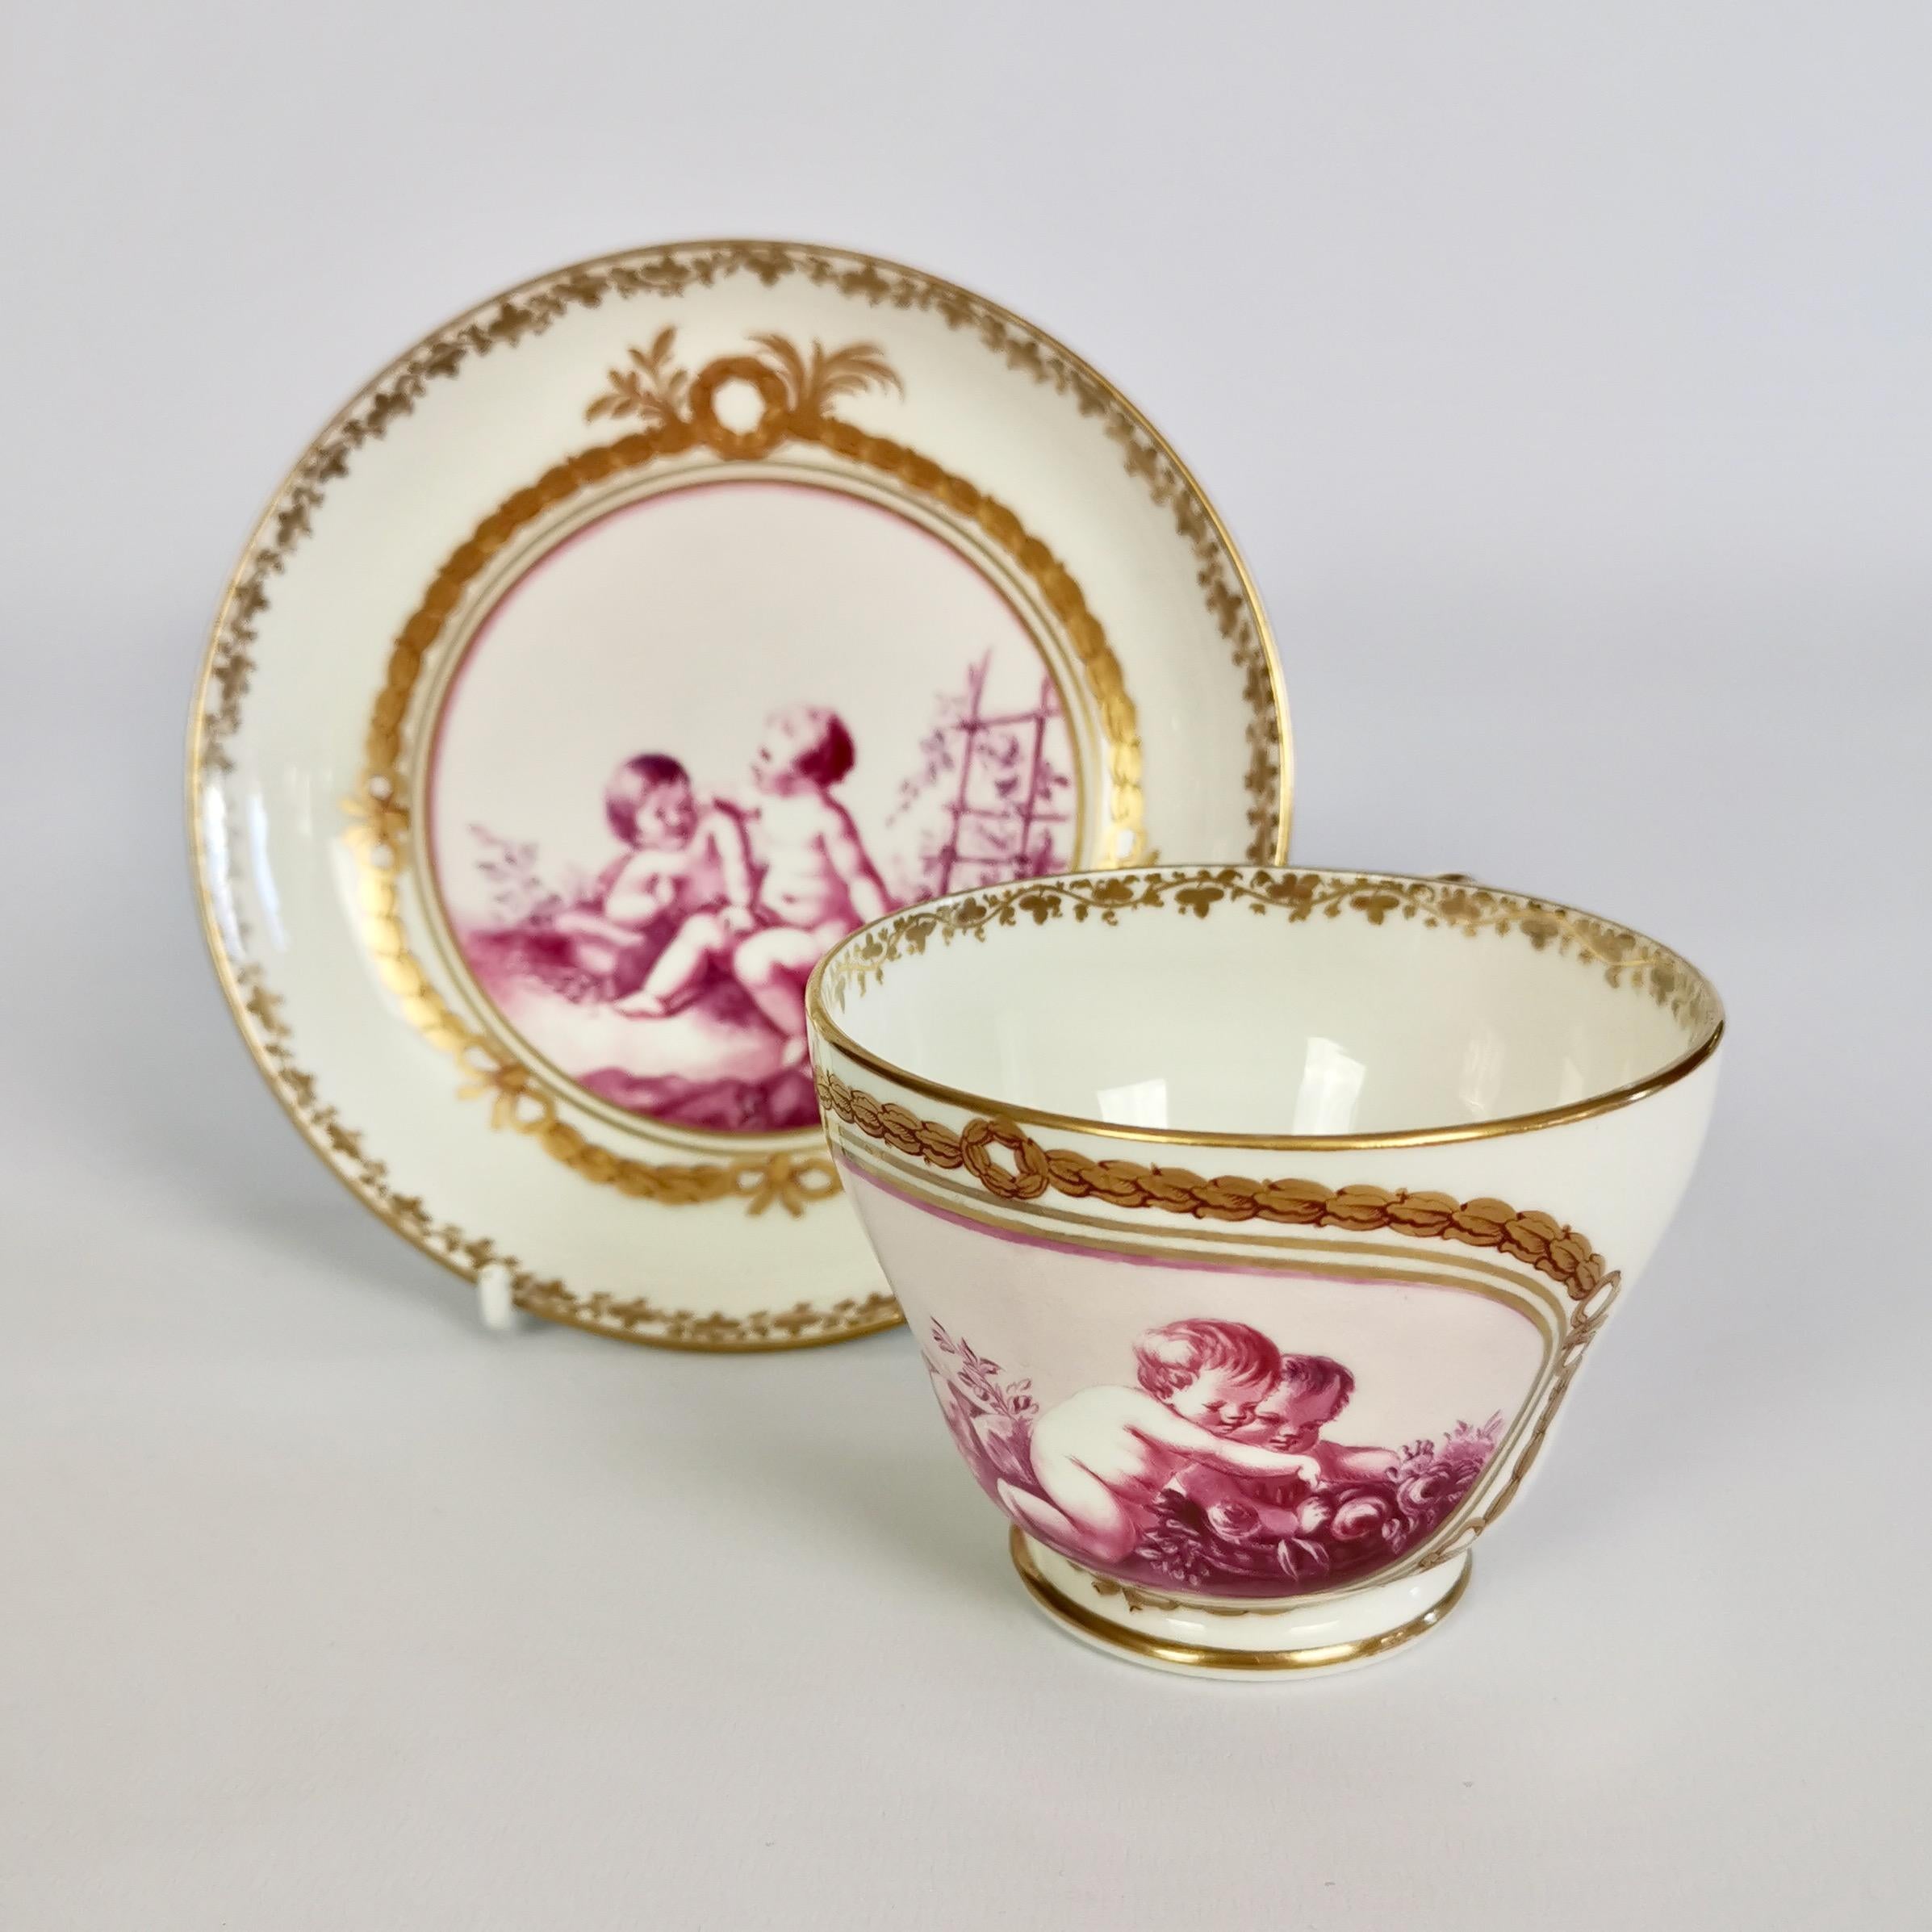 Regency Kerr & Binns Worcester Porcelain Cup and Saucer, Puce Putti Playing, circa 1855